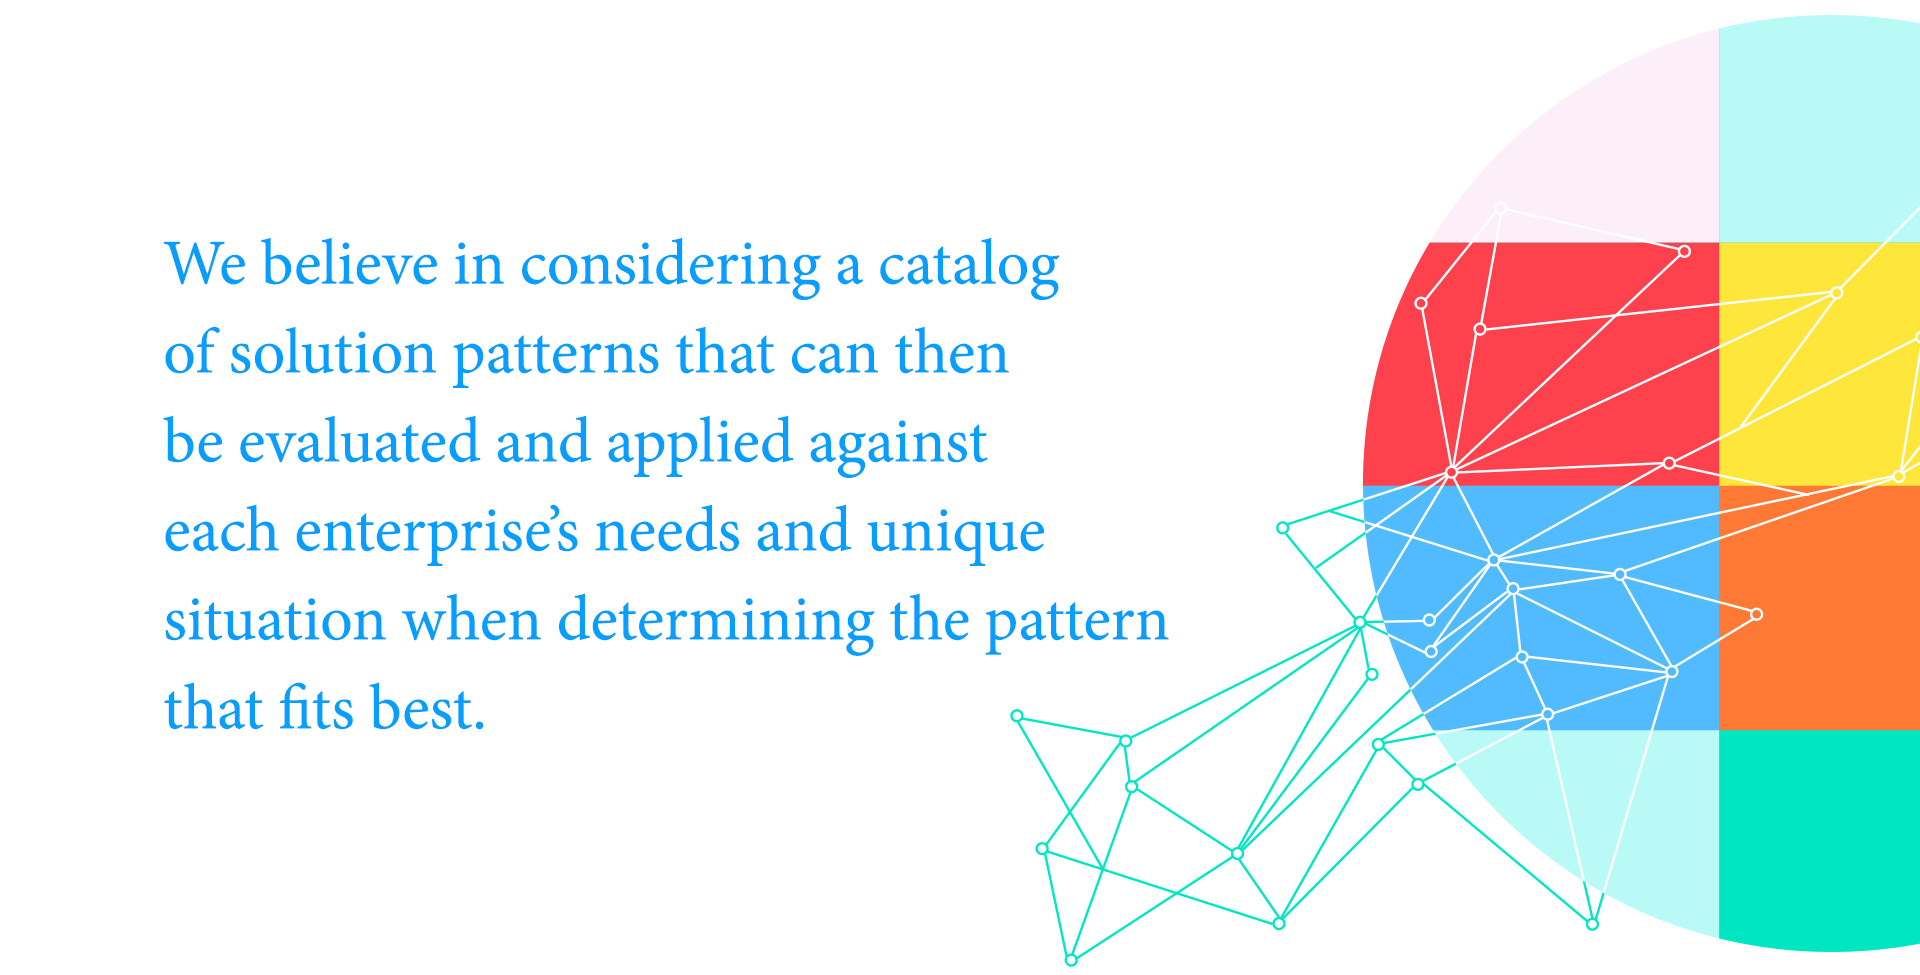 "We believe in considering a catalog of solution patterns that can then be evaluated and applied against each enterprise's needs and unique situation when determining the pattern that best fits"